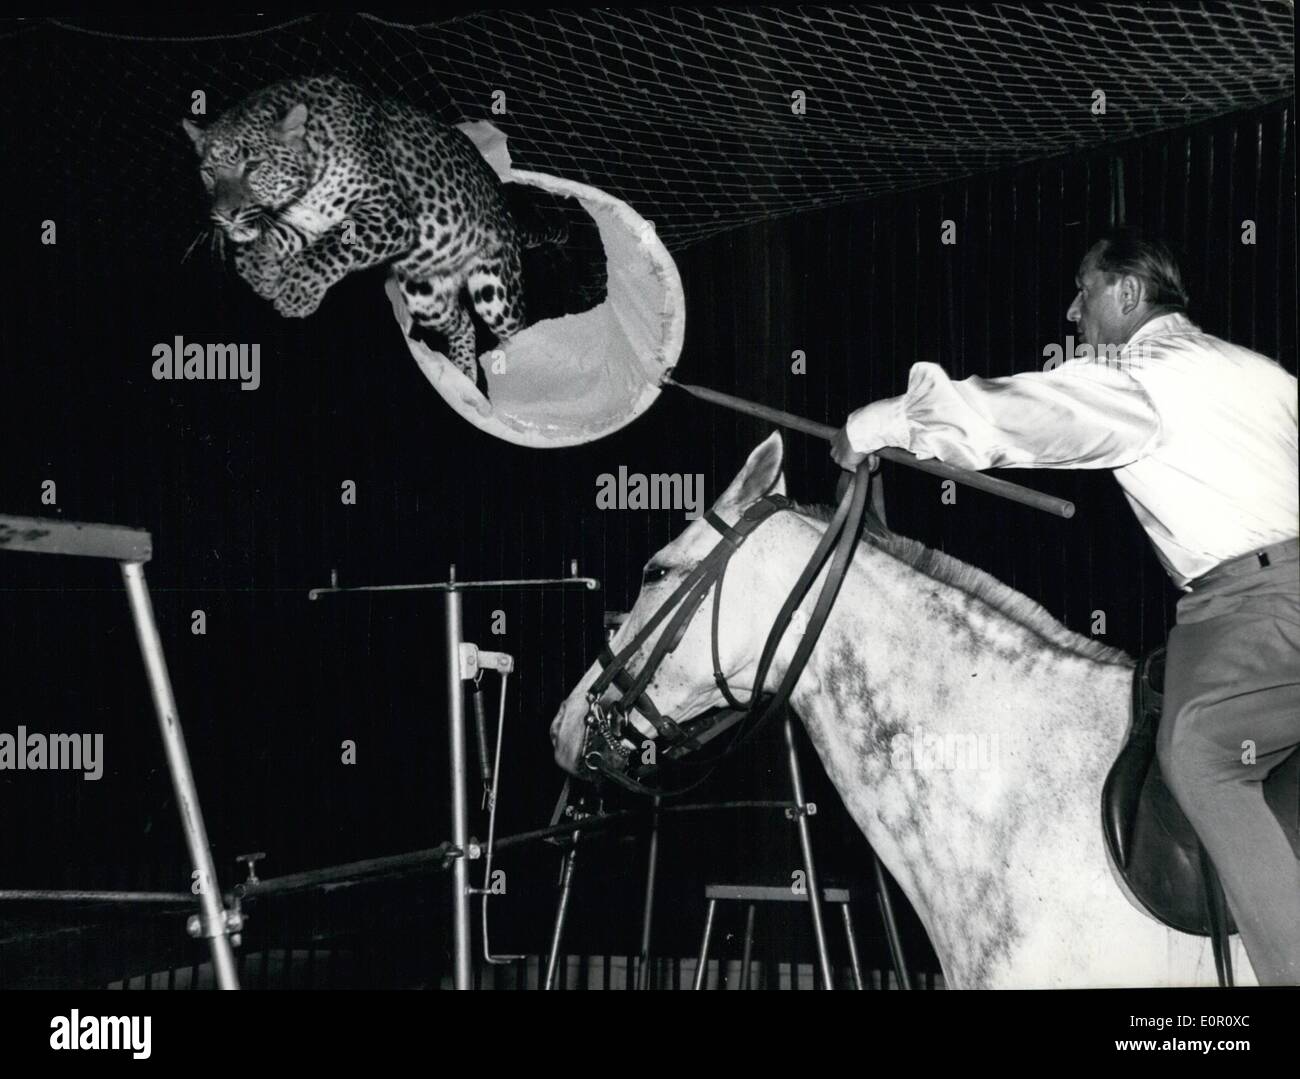 Jun. 06, 1957 - A Group of Dangerous Panthers:Is directed by Jan Garbun in the Circus collien in Hamburg. During the act Jan Garbun is sitting on a Horse. Photo Shows Picture of June 18th, 1957 Stock Photo